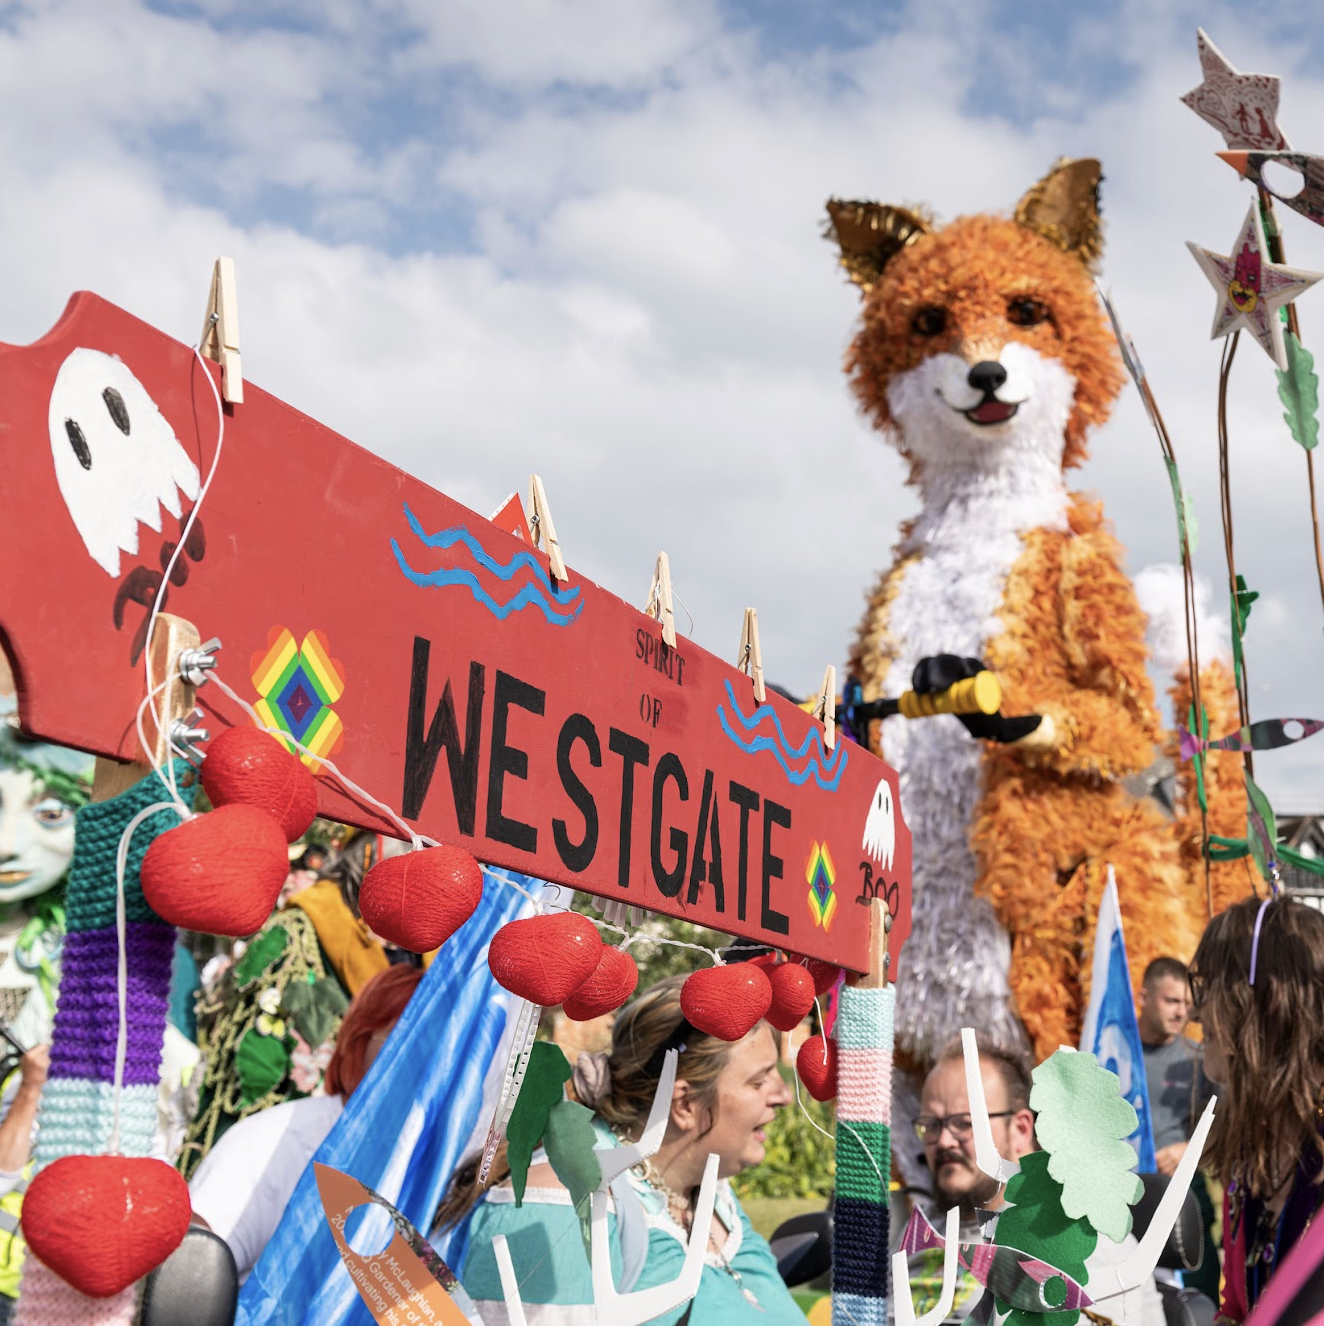 A carnival street scene with crowds, a close-up of a sign reading 'Spirit of Westgate' in the foreground, and a large fox puppet in the background.